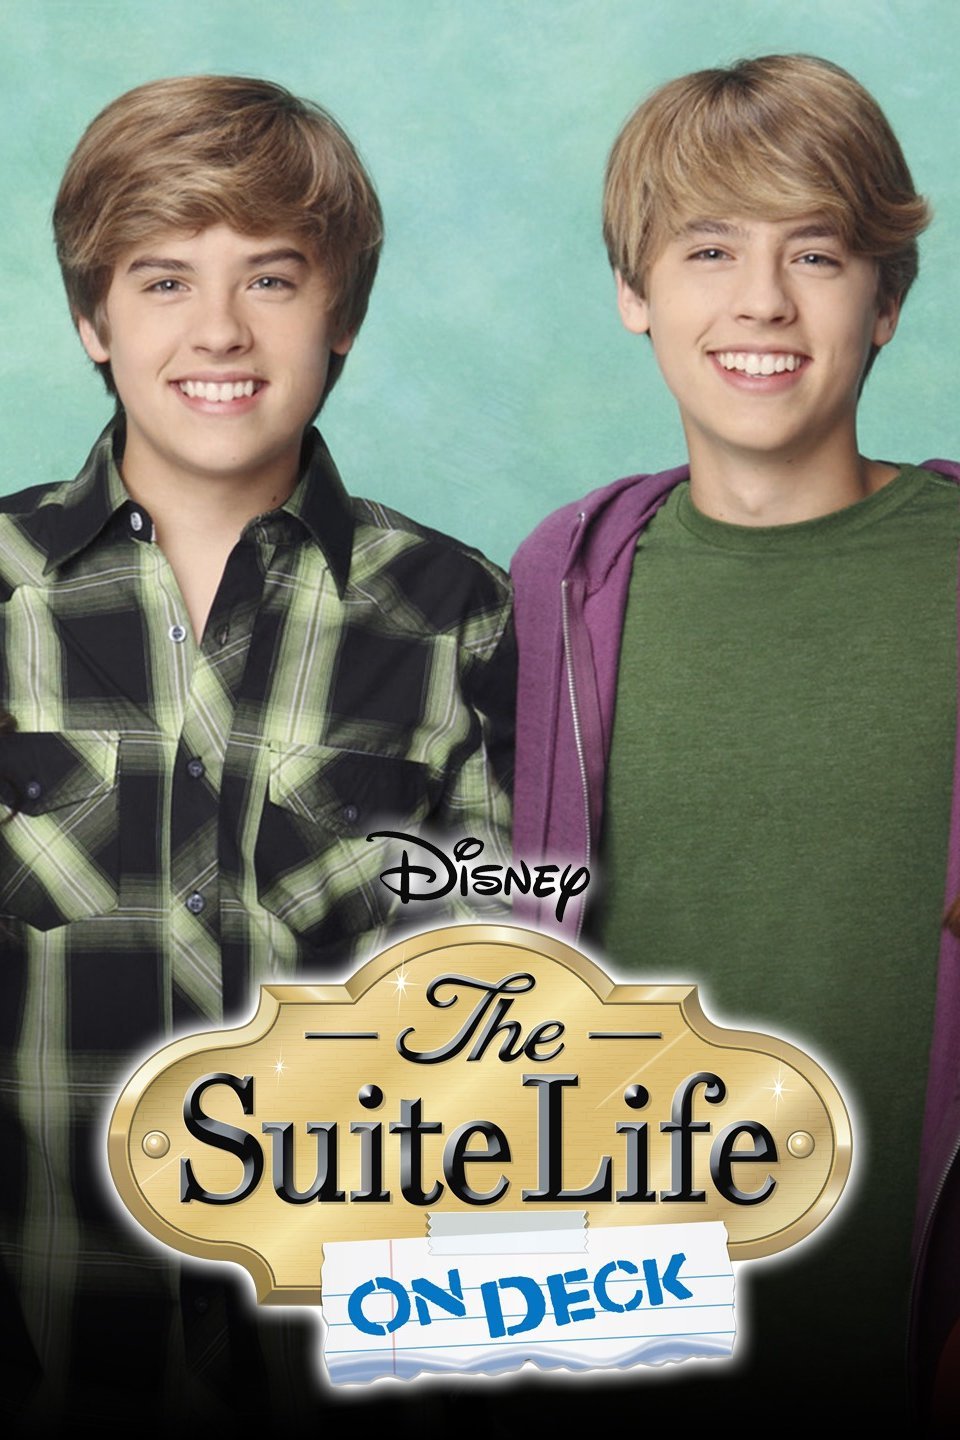 The Suite Life on Deck.